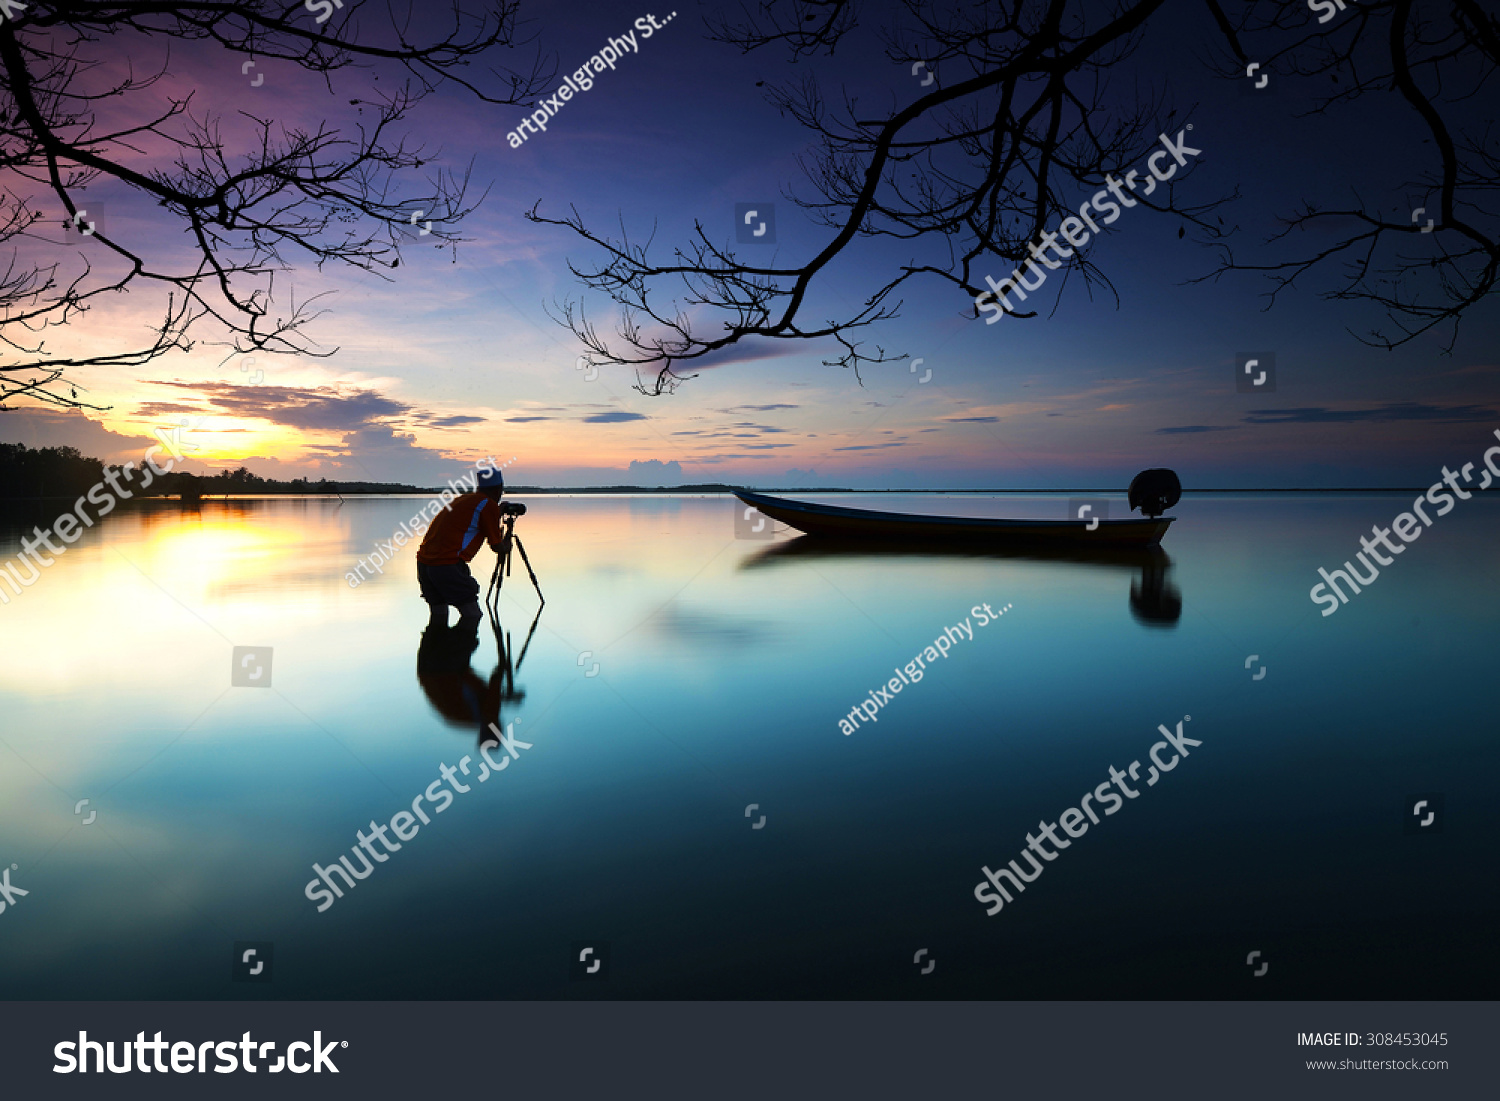 Silhouette of photographer looking to the boat near the beach when the sun goes down with branches tree border. Nature Photography #308453045